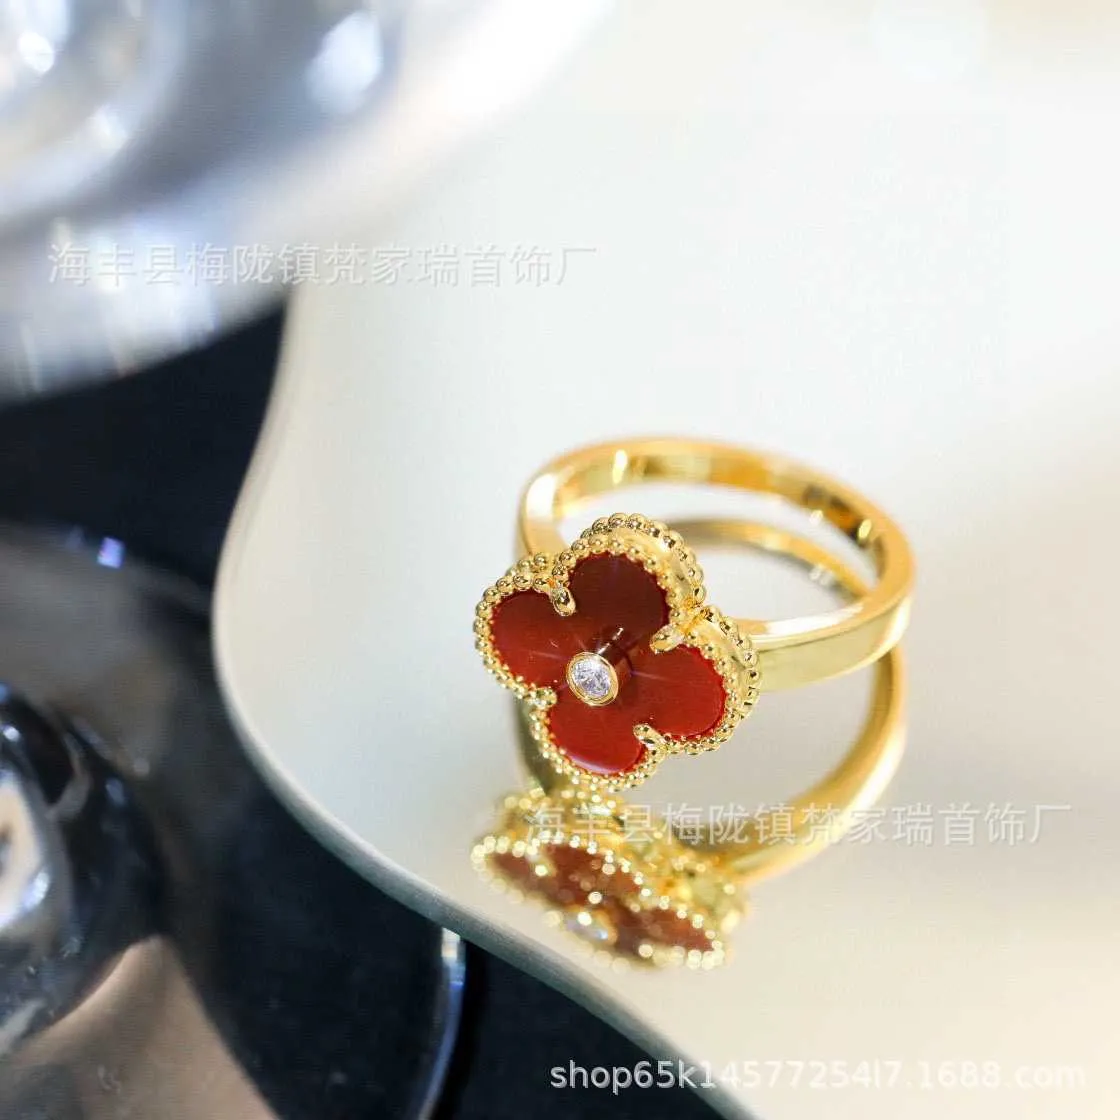 Original brand High version Van K Gold Clover Ring Natural White Fritillaria Personality Lucky Flower Agate with Diamond Finger O